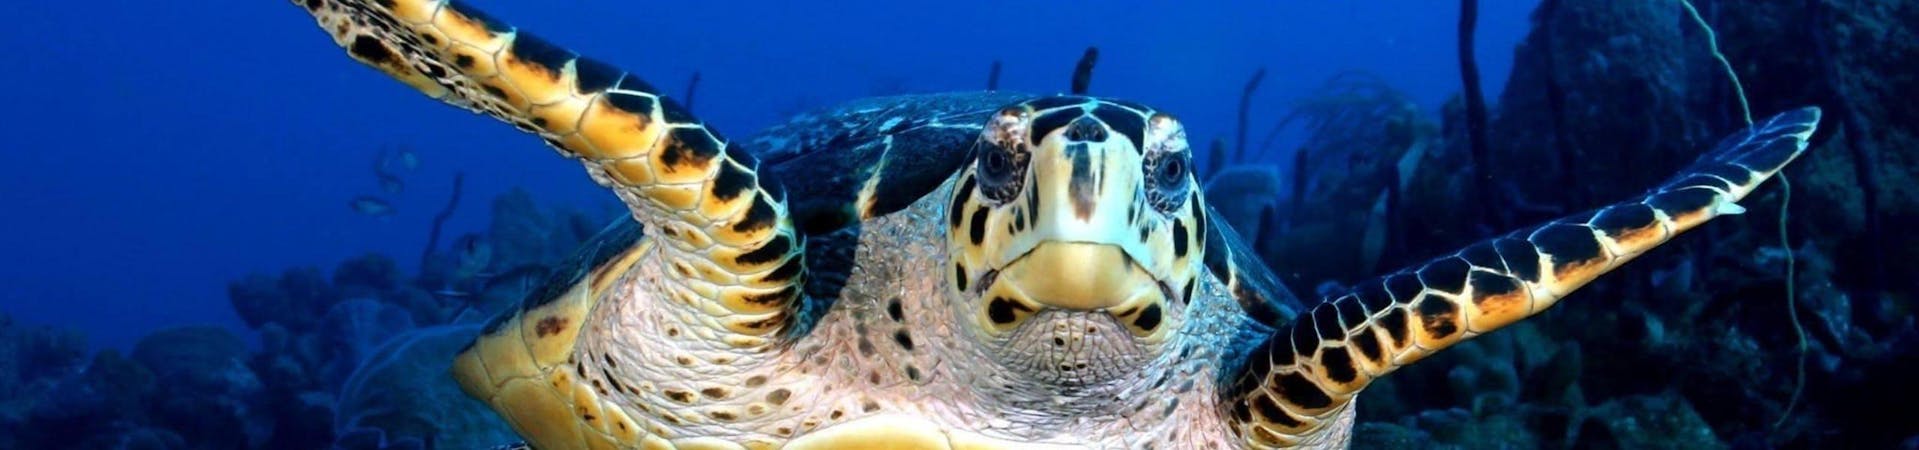 A turtle is pictured during the Trial Scuba Diving in Réserve Cousteau for Beginners activity with Les Heures Saines Guadeloupe.